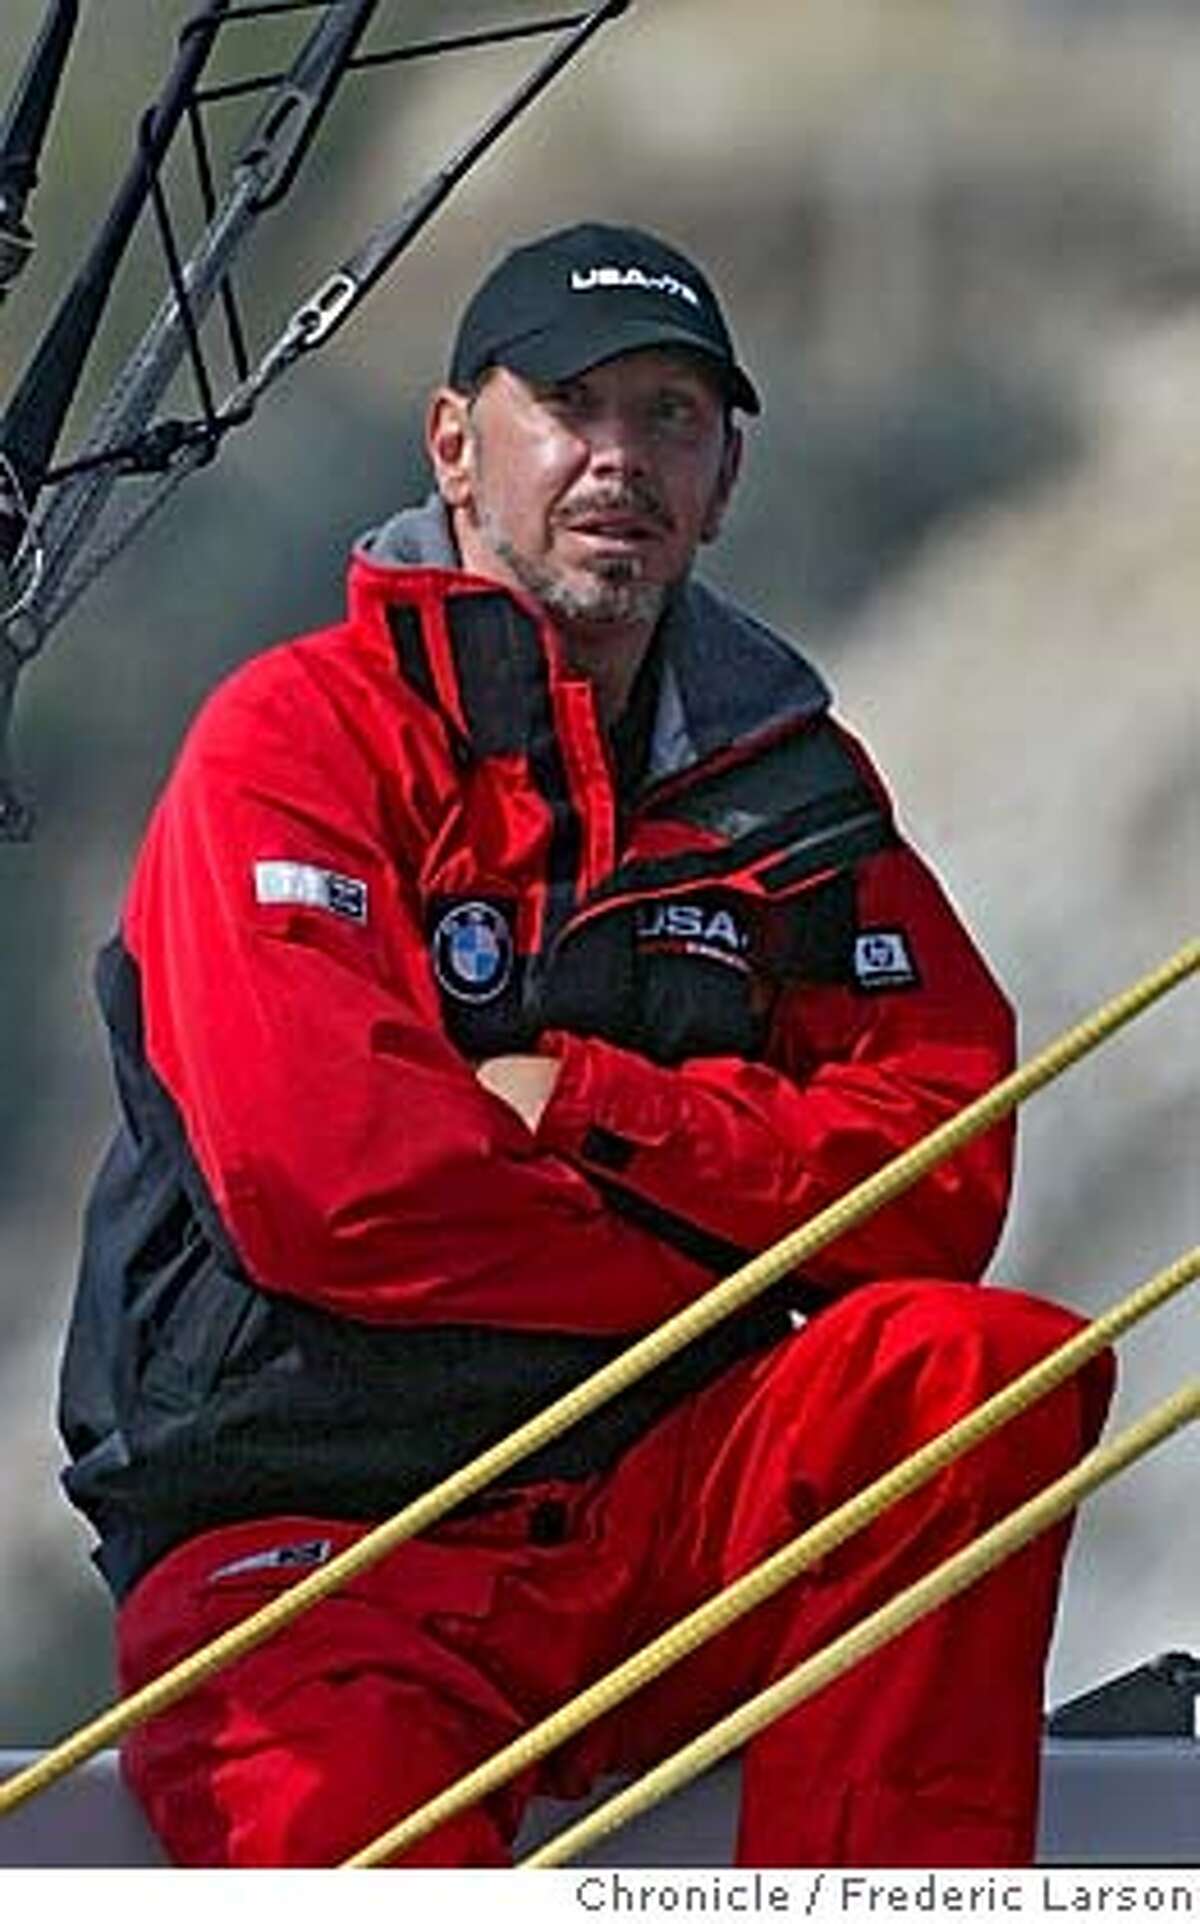 Amercia's Cup class racing returned to the U.S and the Bay Area as the cup winning Swiss team ALINGHI took on Bay Area's , ORACLE BMW racing team. Larry Ellison is at the helm (in photo) of the Oracle racing team , against his friend and rival, Ernesto Bertarelli, skipper of the Alinghi. Oracle won the first race of a pair racing today. 09/11/03 FREDERIC LARSON / The Chronicle